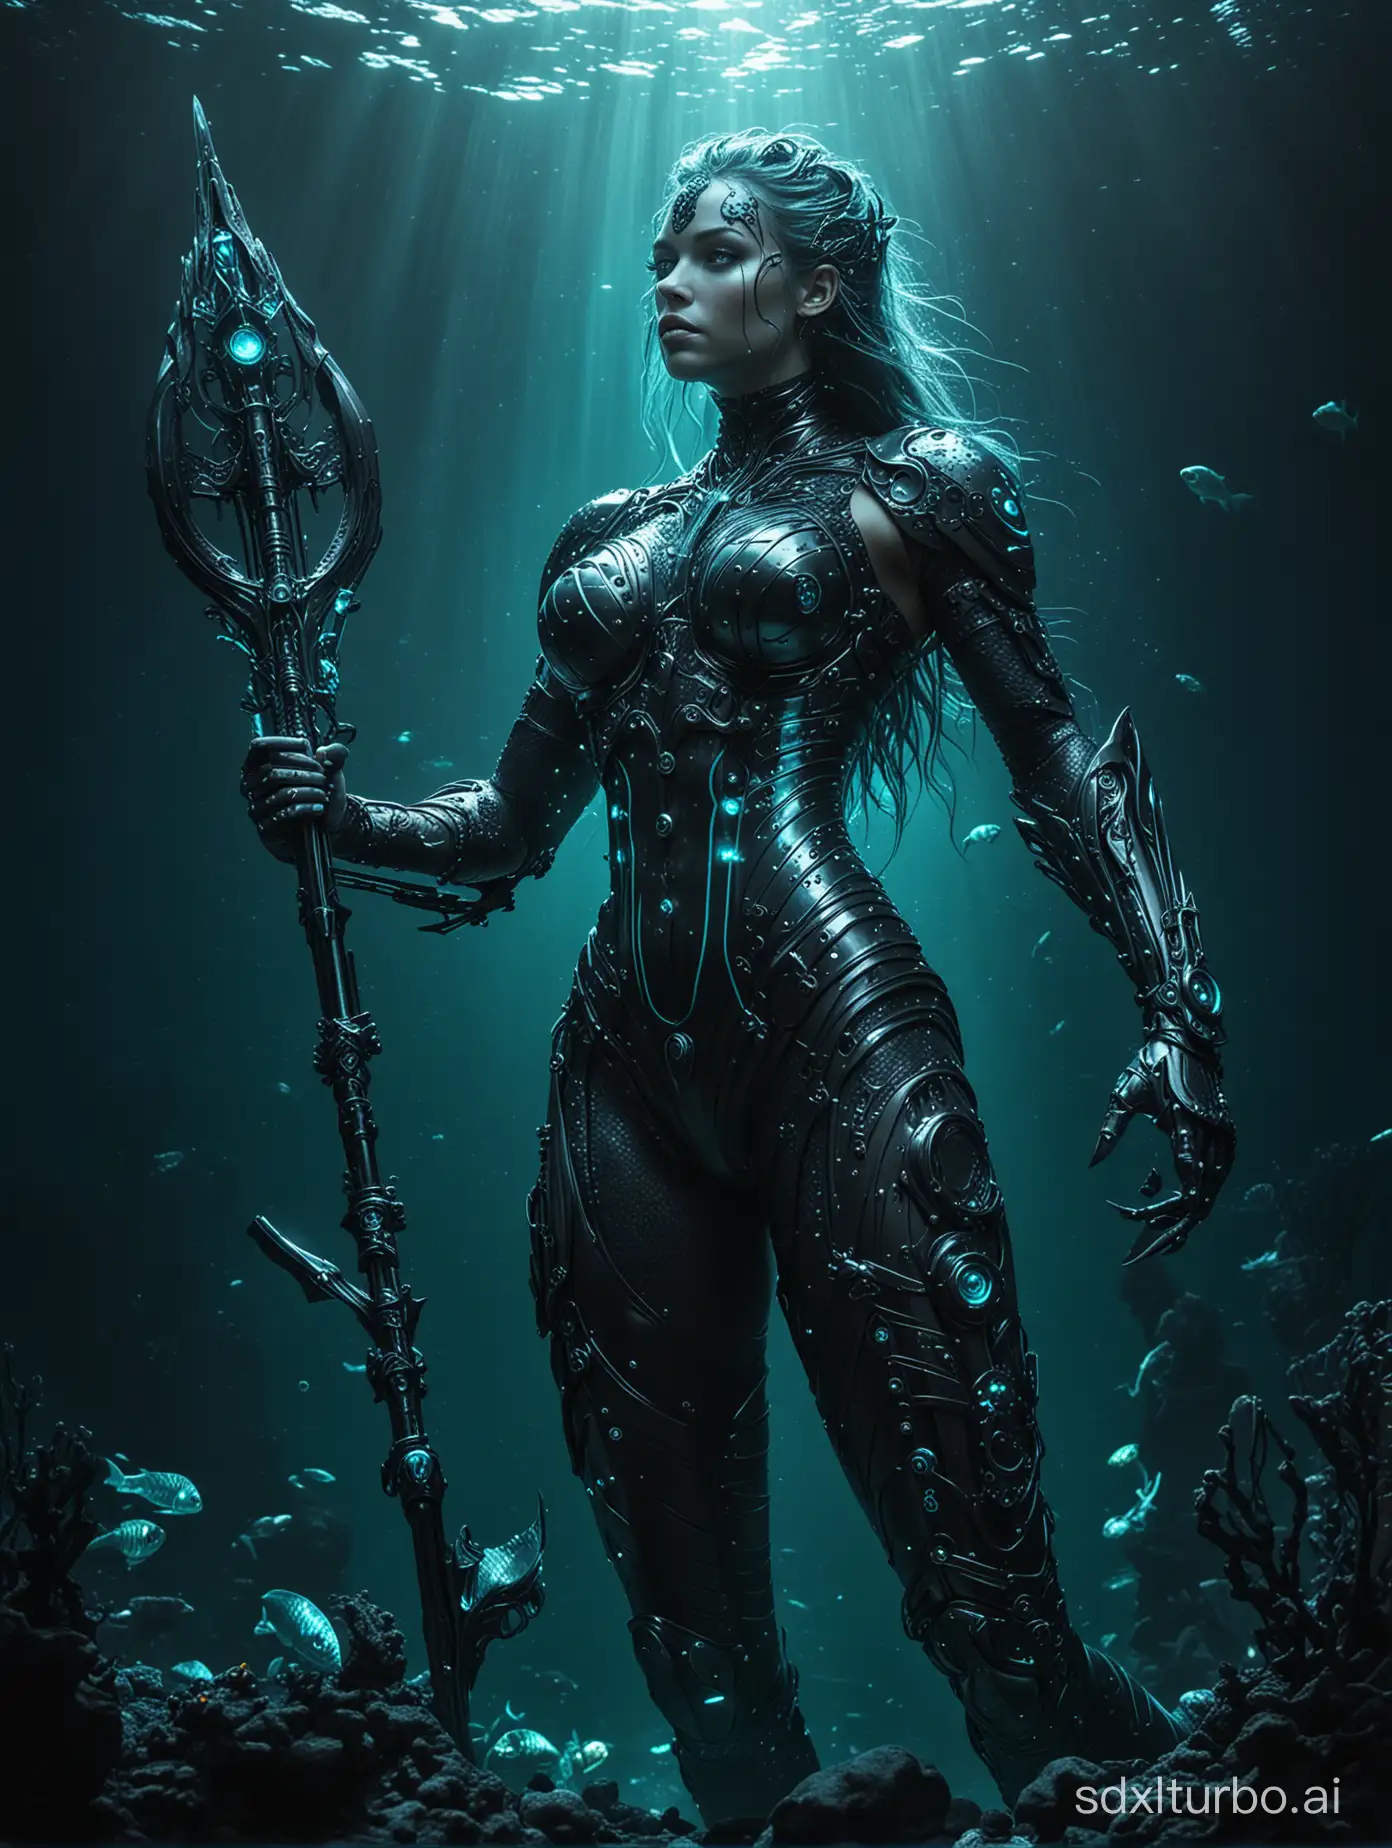 Mermaid cyborg
Low angle shot photography, 
A male mermaid merges his body with cyborg enhancements, neon light,clad in black titanium armor with cyan accents, amidst the depths of the dark  ocean. Surrounding him are intricately detailed fish as he wields a long weapon.